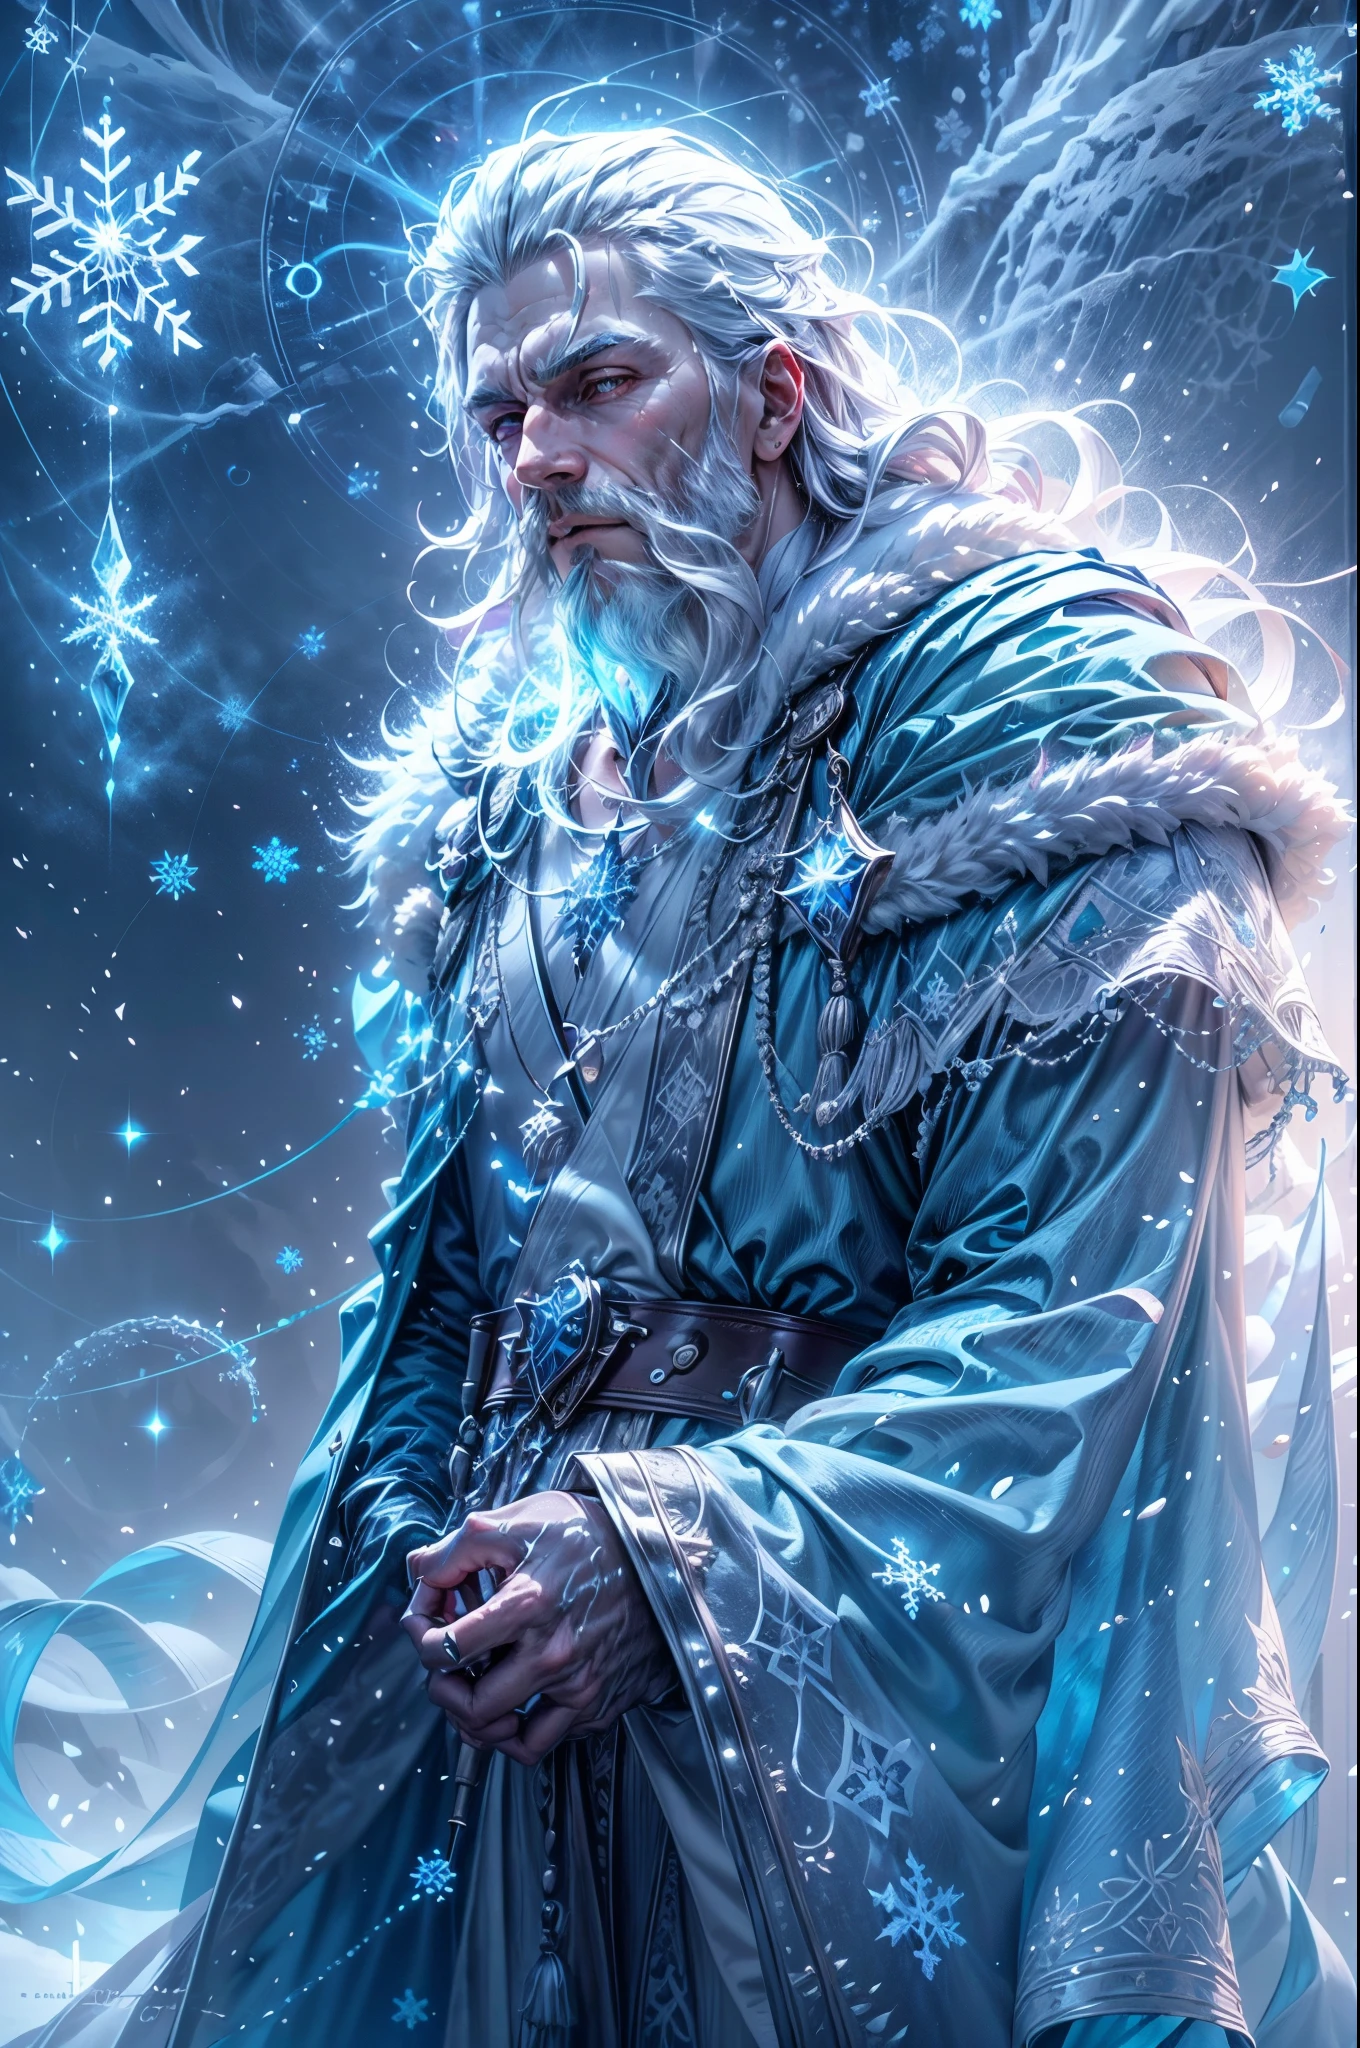 (a detailed, realistic portrait)Santa Claus(,the iconic Christmas figure,)as an ice wizard,in a snowy winter landscape(dotted with frosted trees and gently falling snowflakes).His(white, flowing)beard(glistens with ice crystals and)extends(below his waist).He wears(a long, blue robe),(embroidered with delicate snowflake patterns),that billows in the cold wind, and(a silver belt)cinches his waist. His eyes(glitter with a subtle blue hue)and(his nose is adorned with a snowflake-shaped)-shaped silver ring. In one hand, he holds(a sparkling icicle staff)that emits a soft, cool glow.(He stands atop a towering)ice platform,(emitting an ethereal blue light)that emanates from underneath it. The sky(dons a palette of icy blue and lavender hues),while(pale sunlight)peeks through the clouds, casting a(soft, cool glow)over the entire scene.